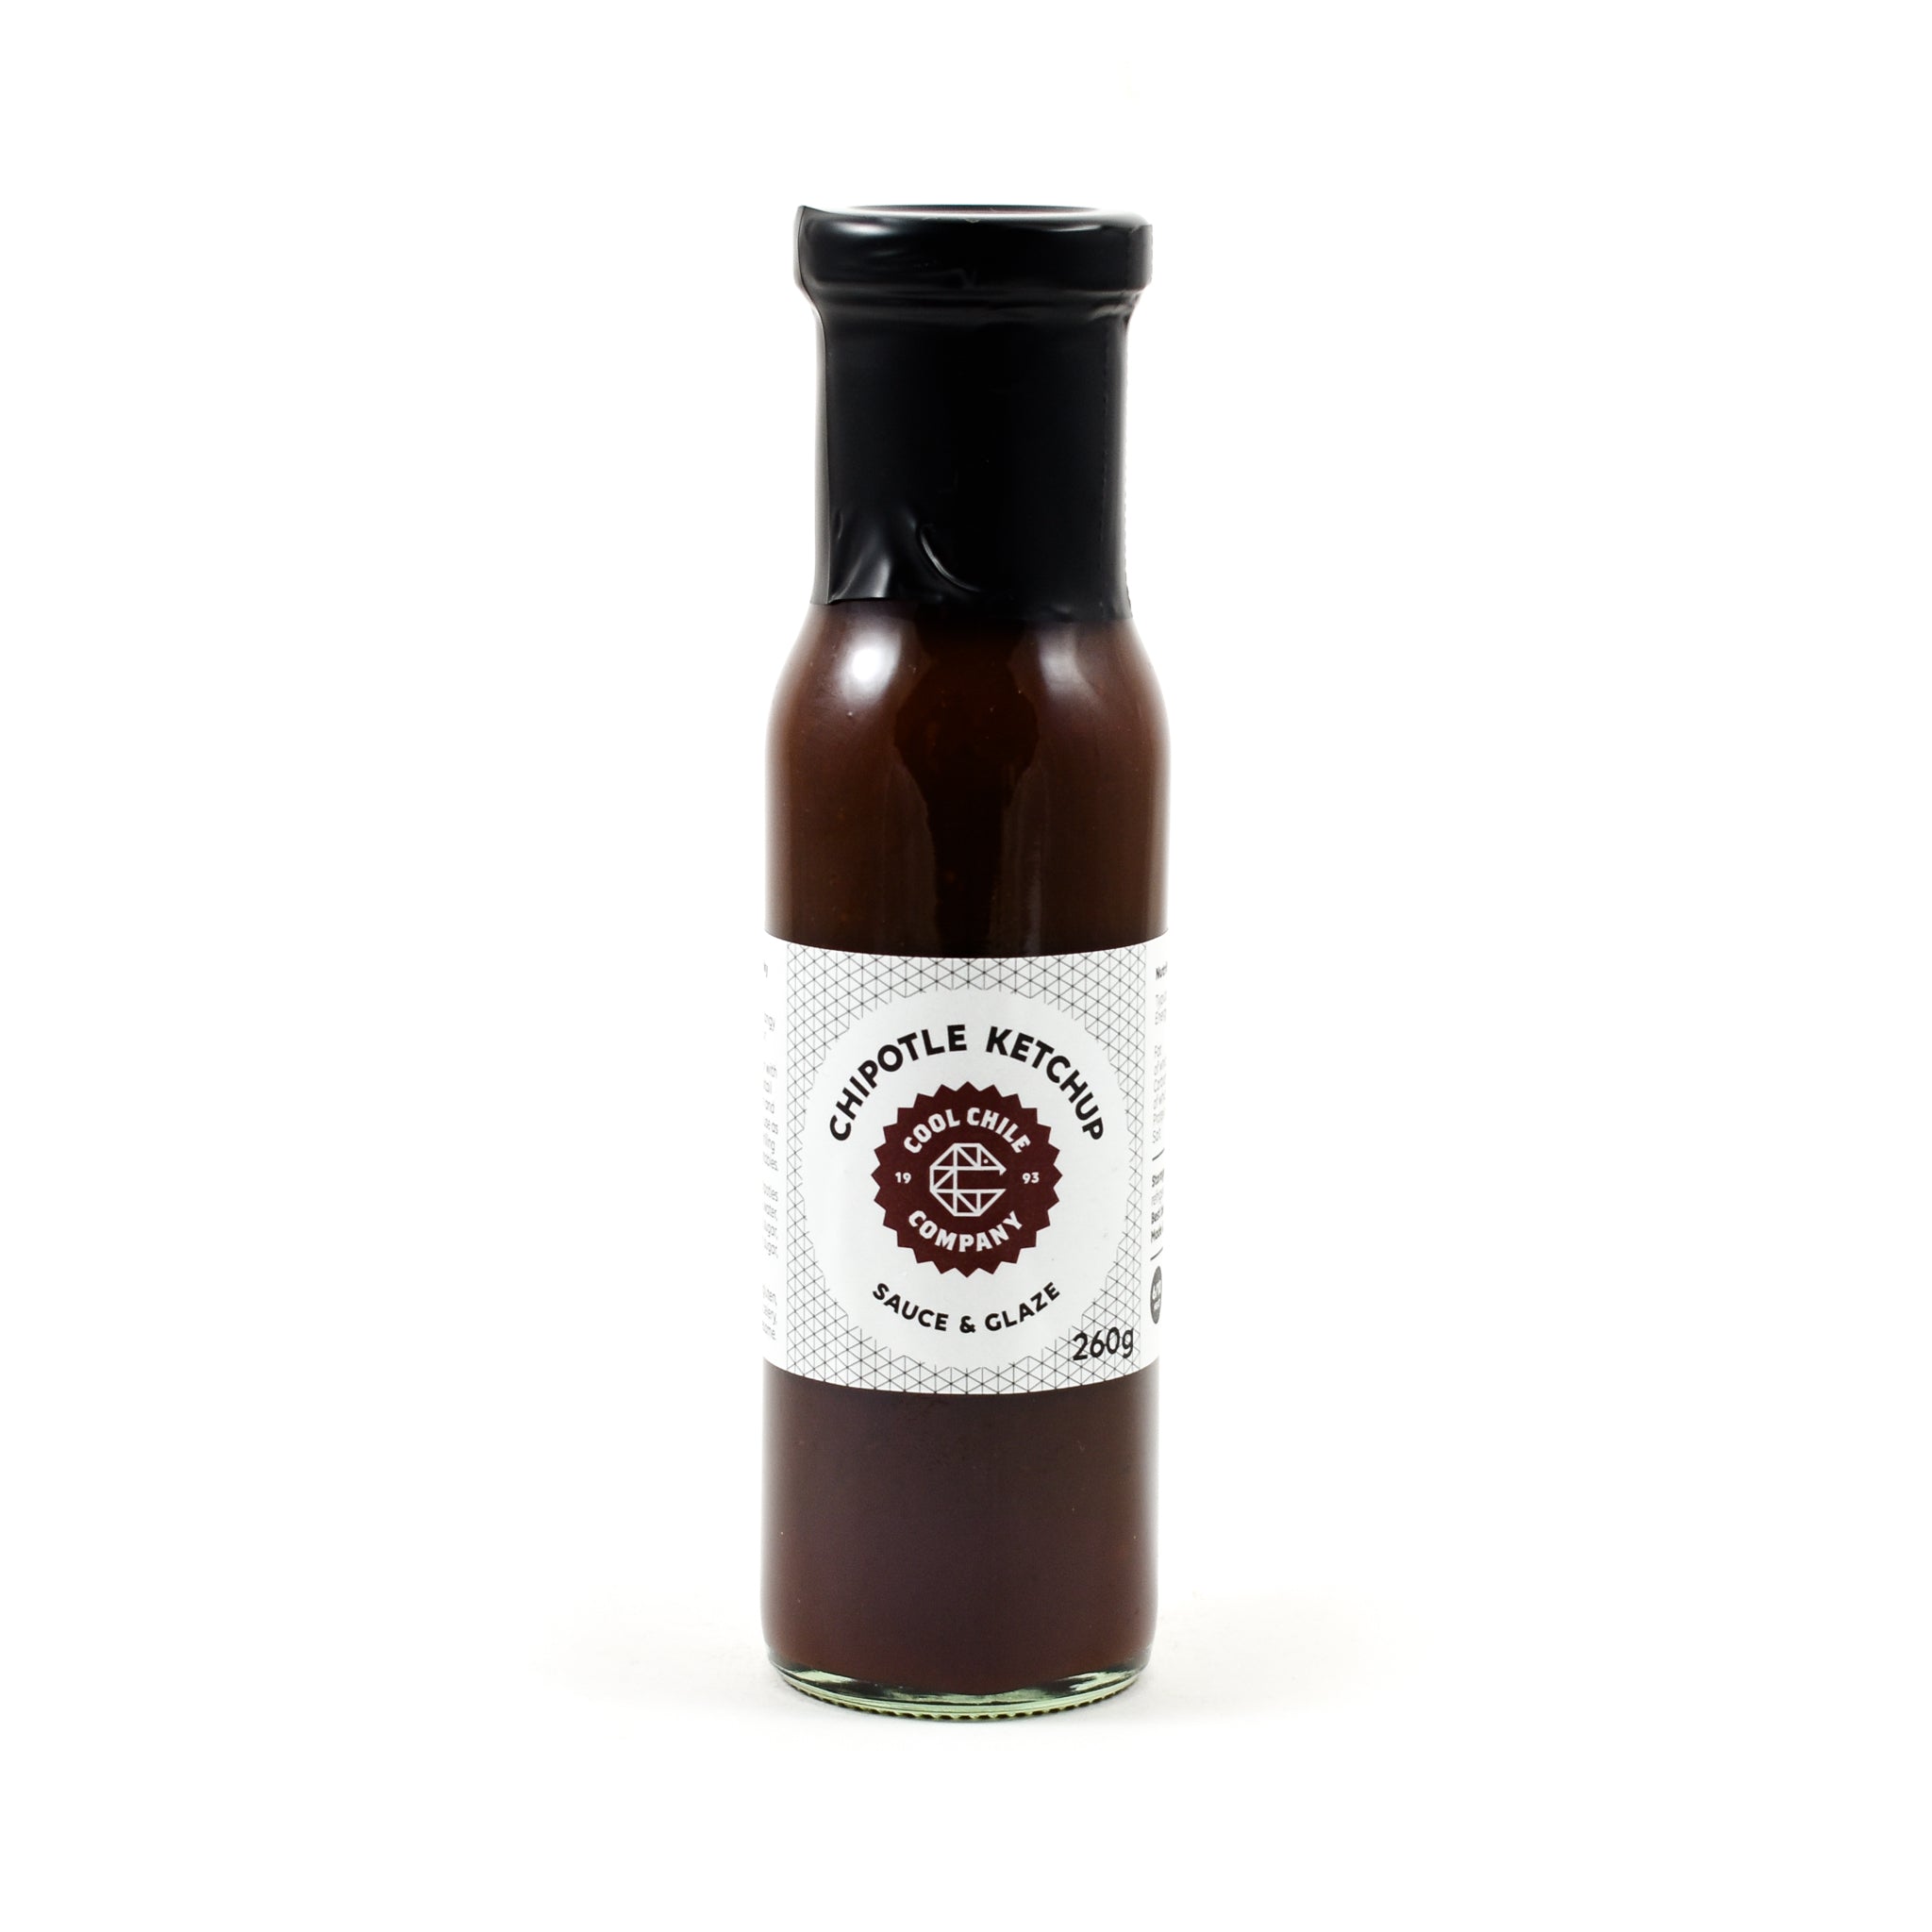 Cool Chile Co Chipotle Ketchup 260g Ingredients Sauces & Condiments American Sauces & Condiments